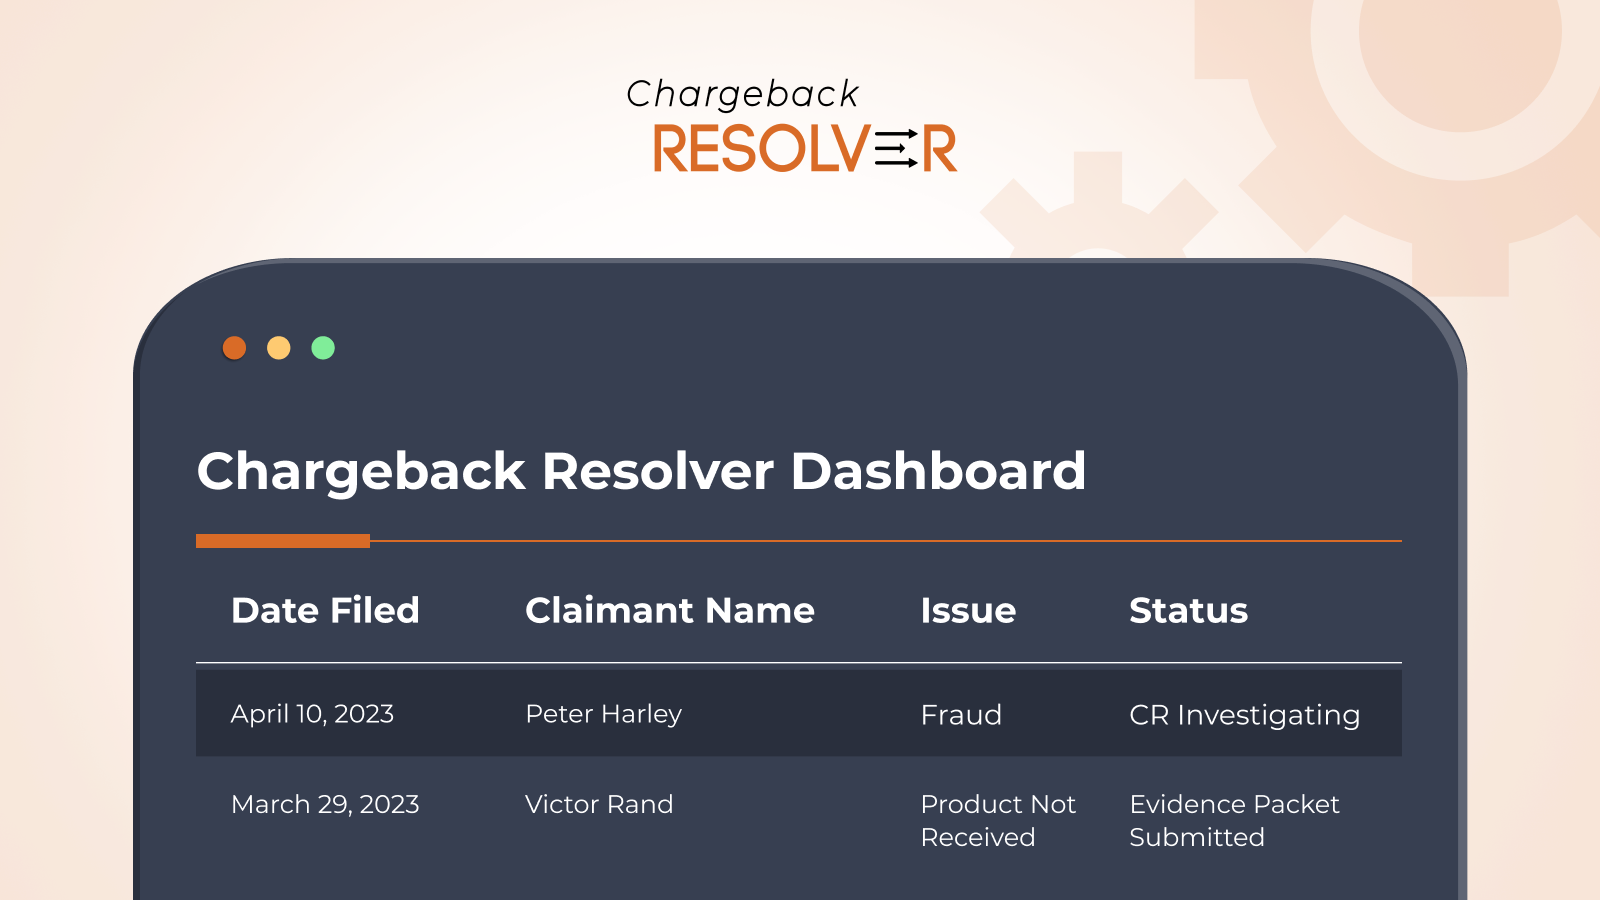 Easy, hassle-free way to manage your chargebacks